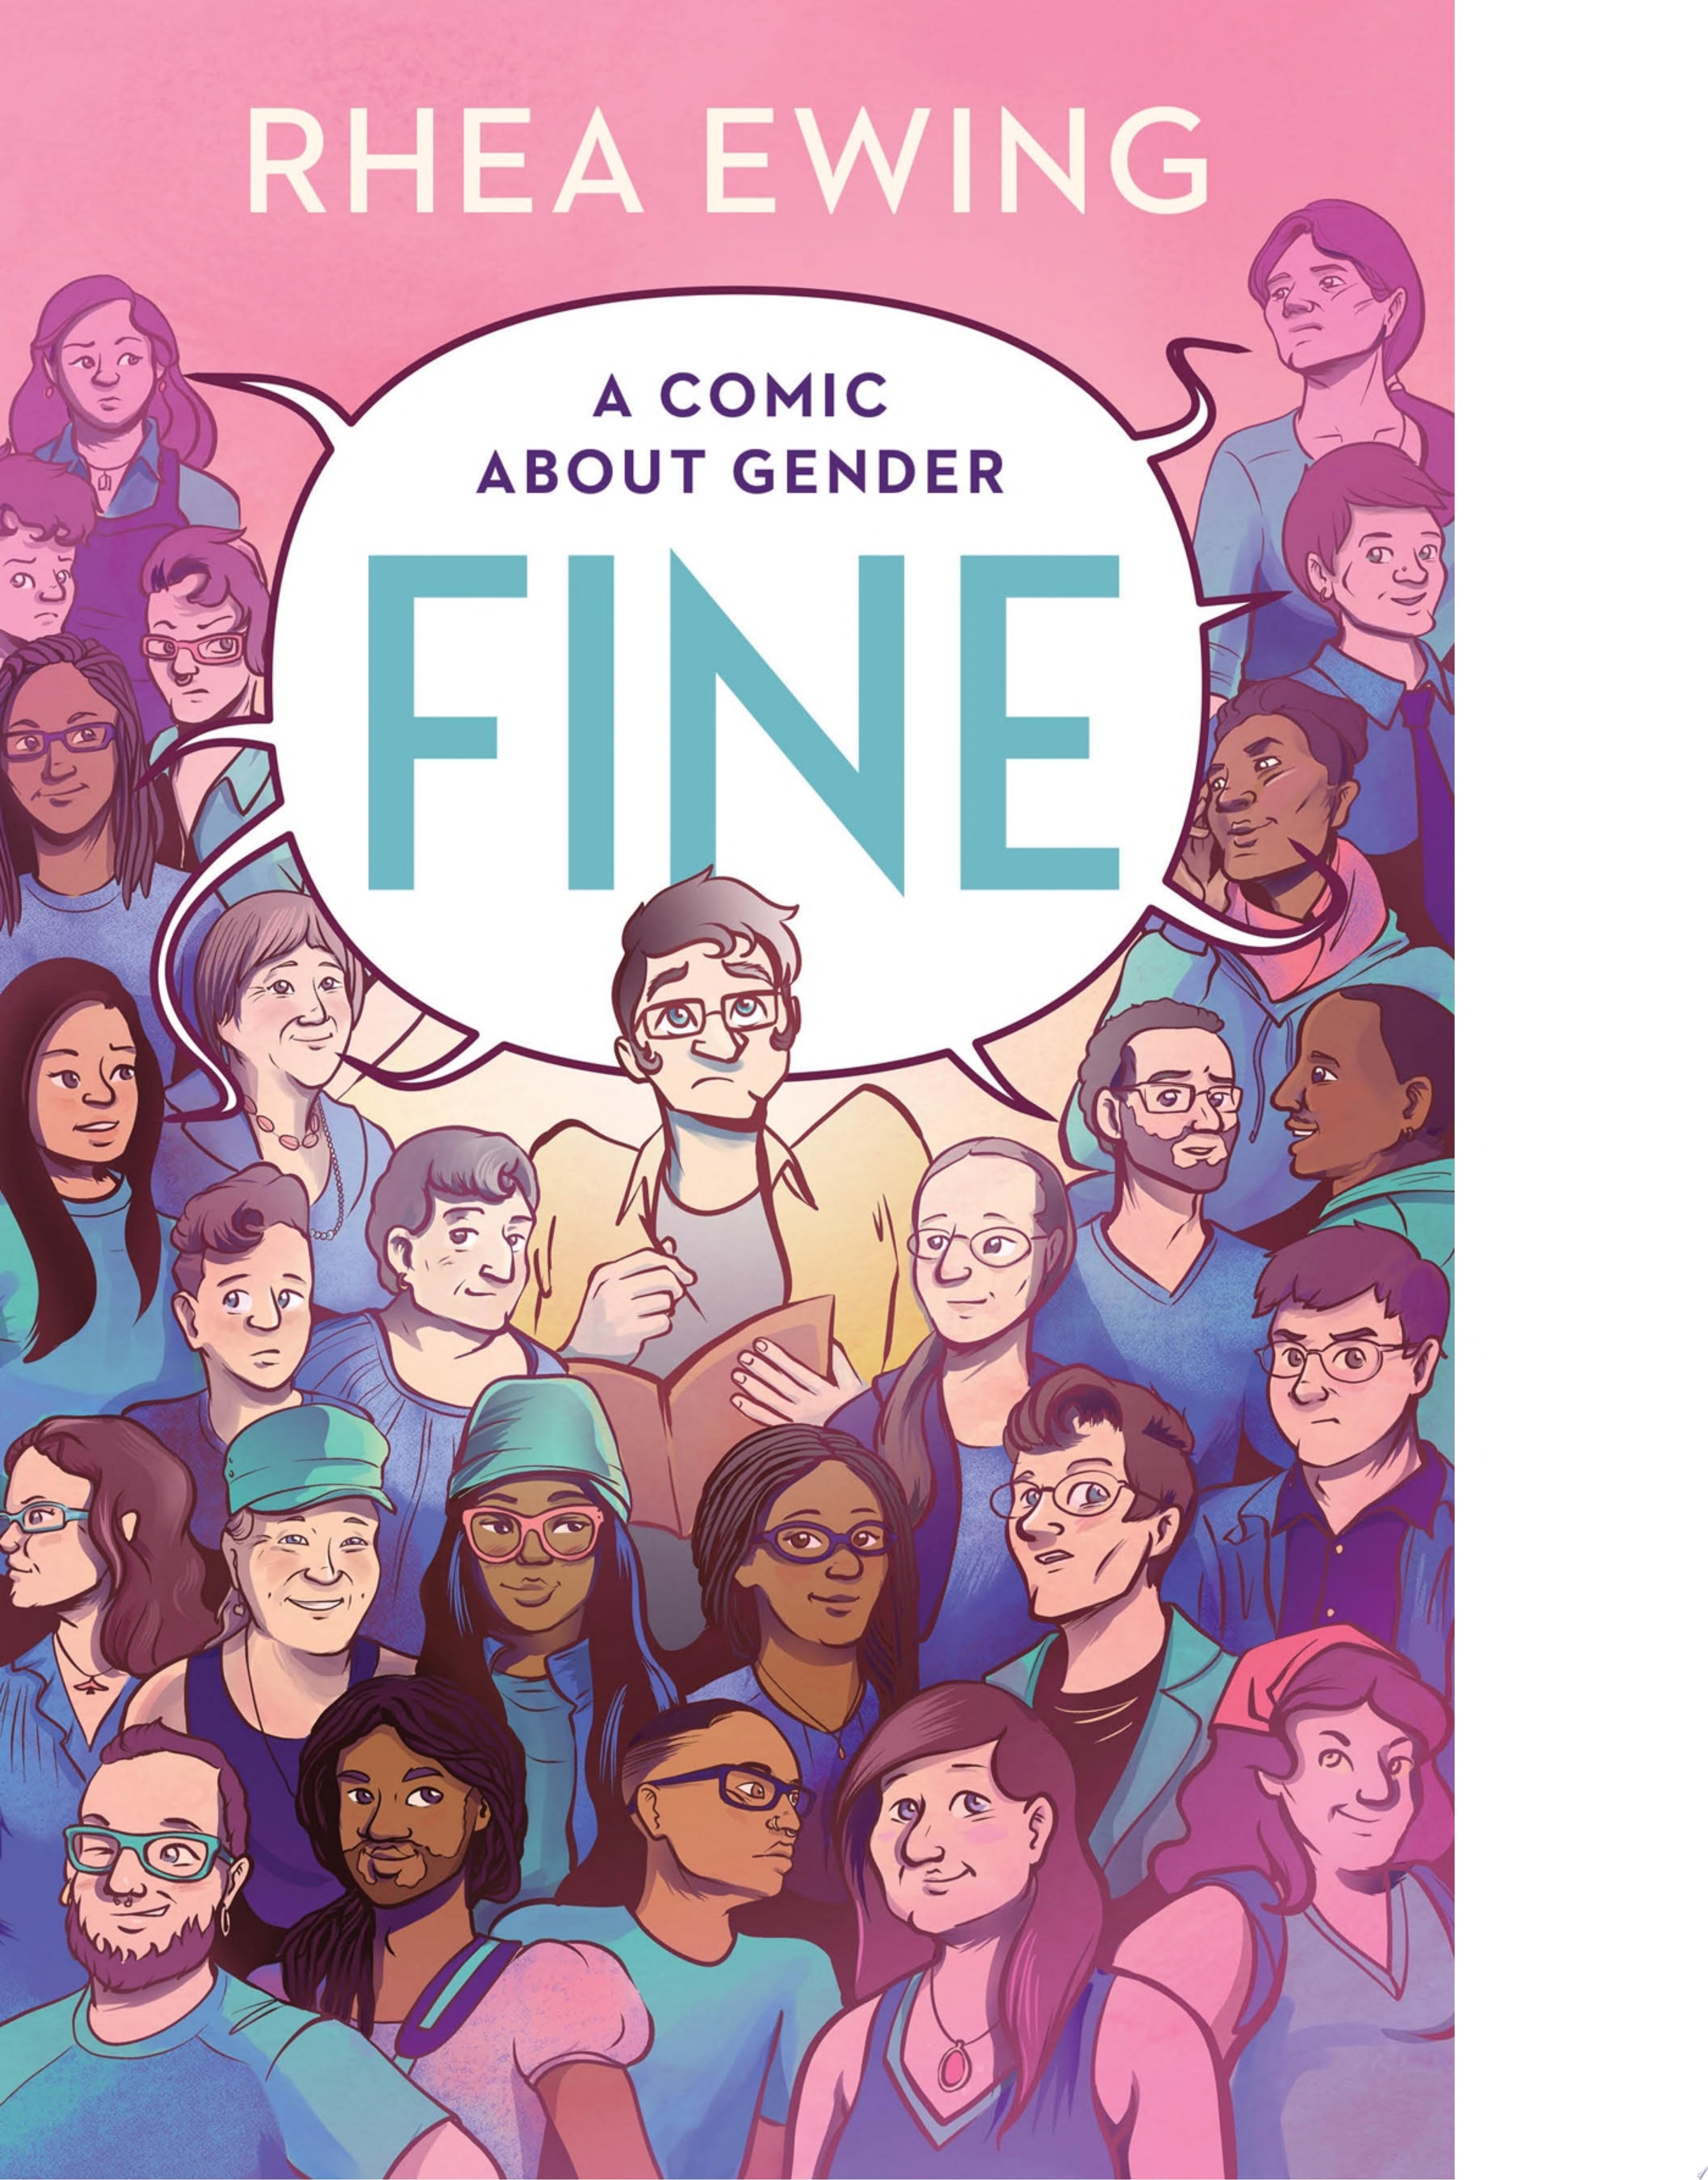 Image for "Fine: A Comic About Gender"